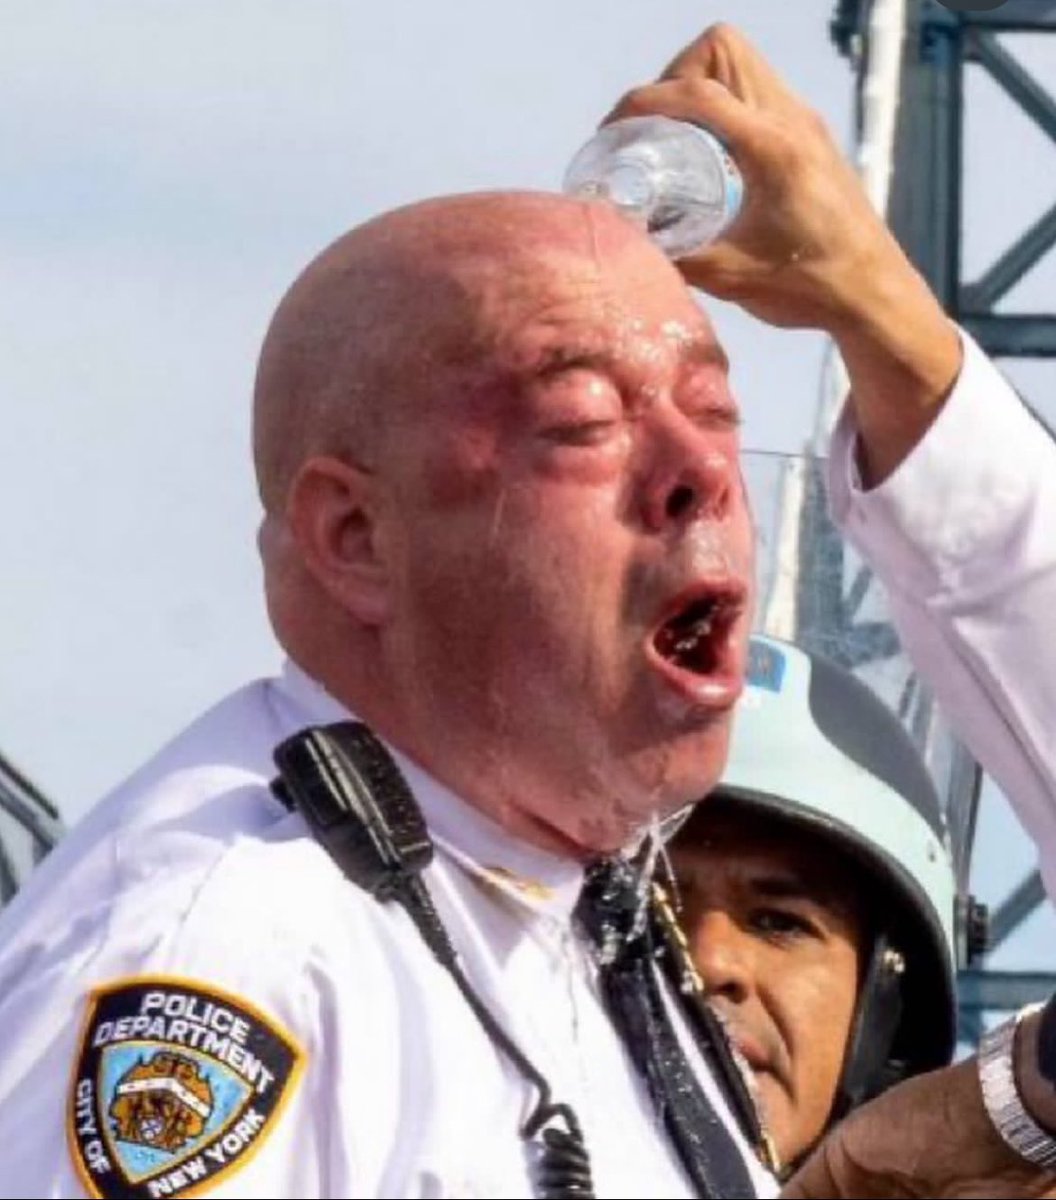 NYPD Assistant Chief James McCarthy accidentally pepper-sprays himself during anti-genocide protest, May 12th. Why are we giving these guys assault rifles? We should instead build safe rooms for them in schools for when there’s an active shooter.